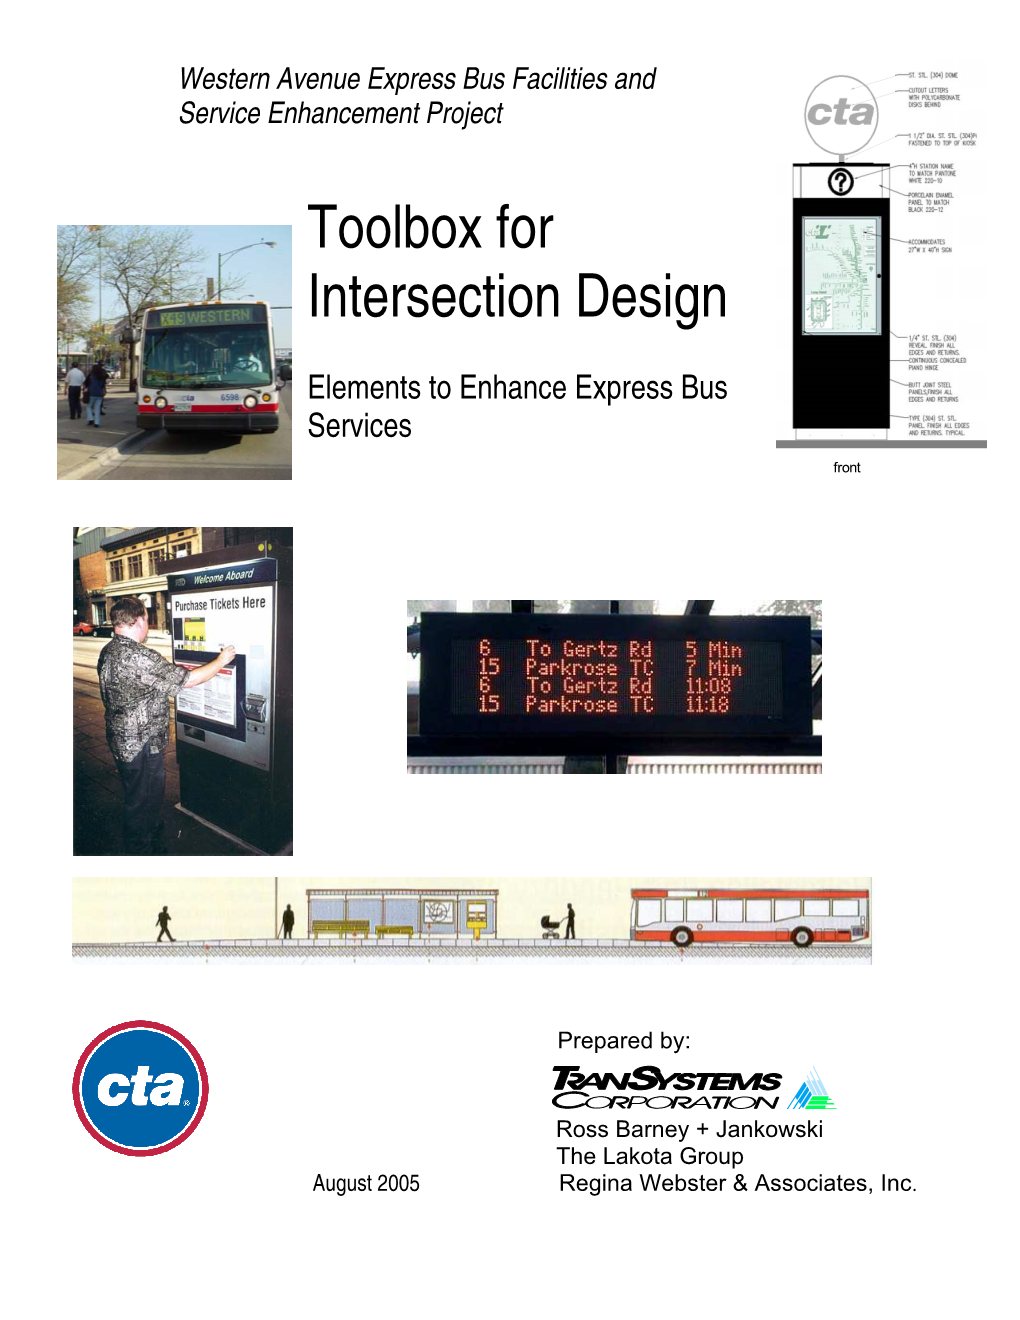 Western Avenue Express Bus Toolbox for Intersection Design